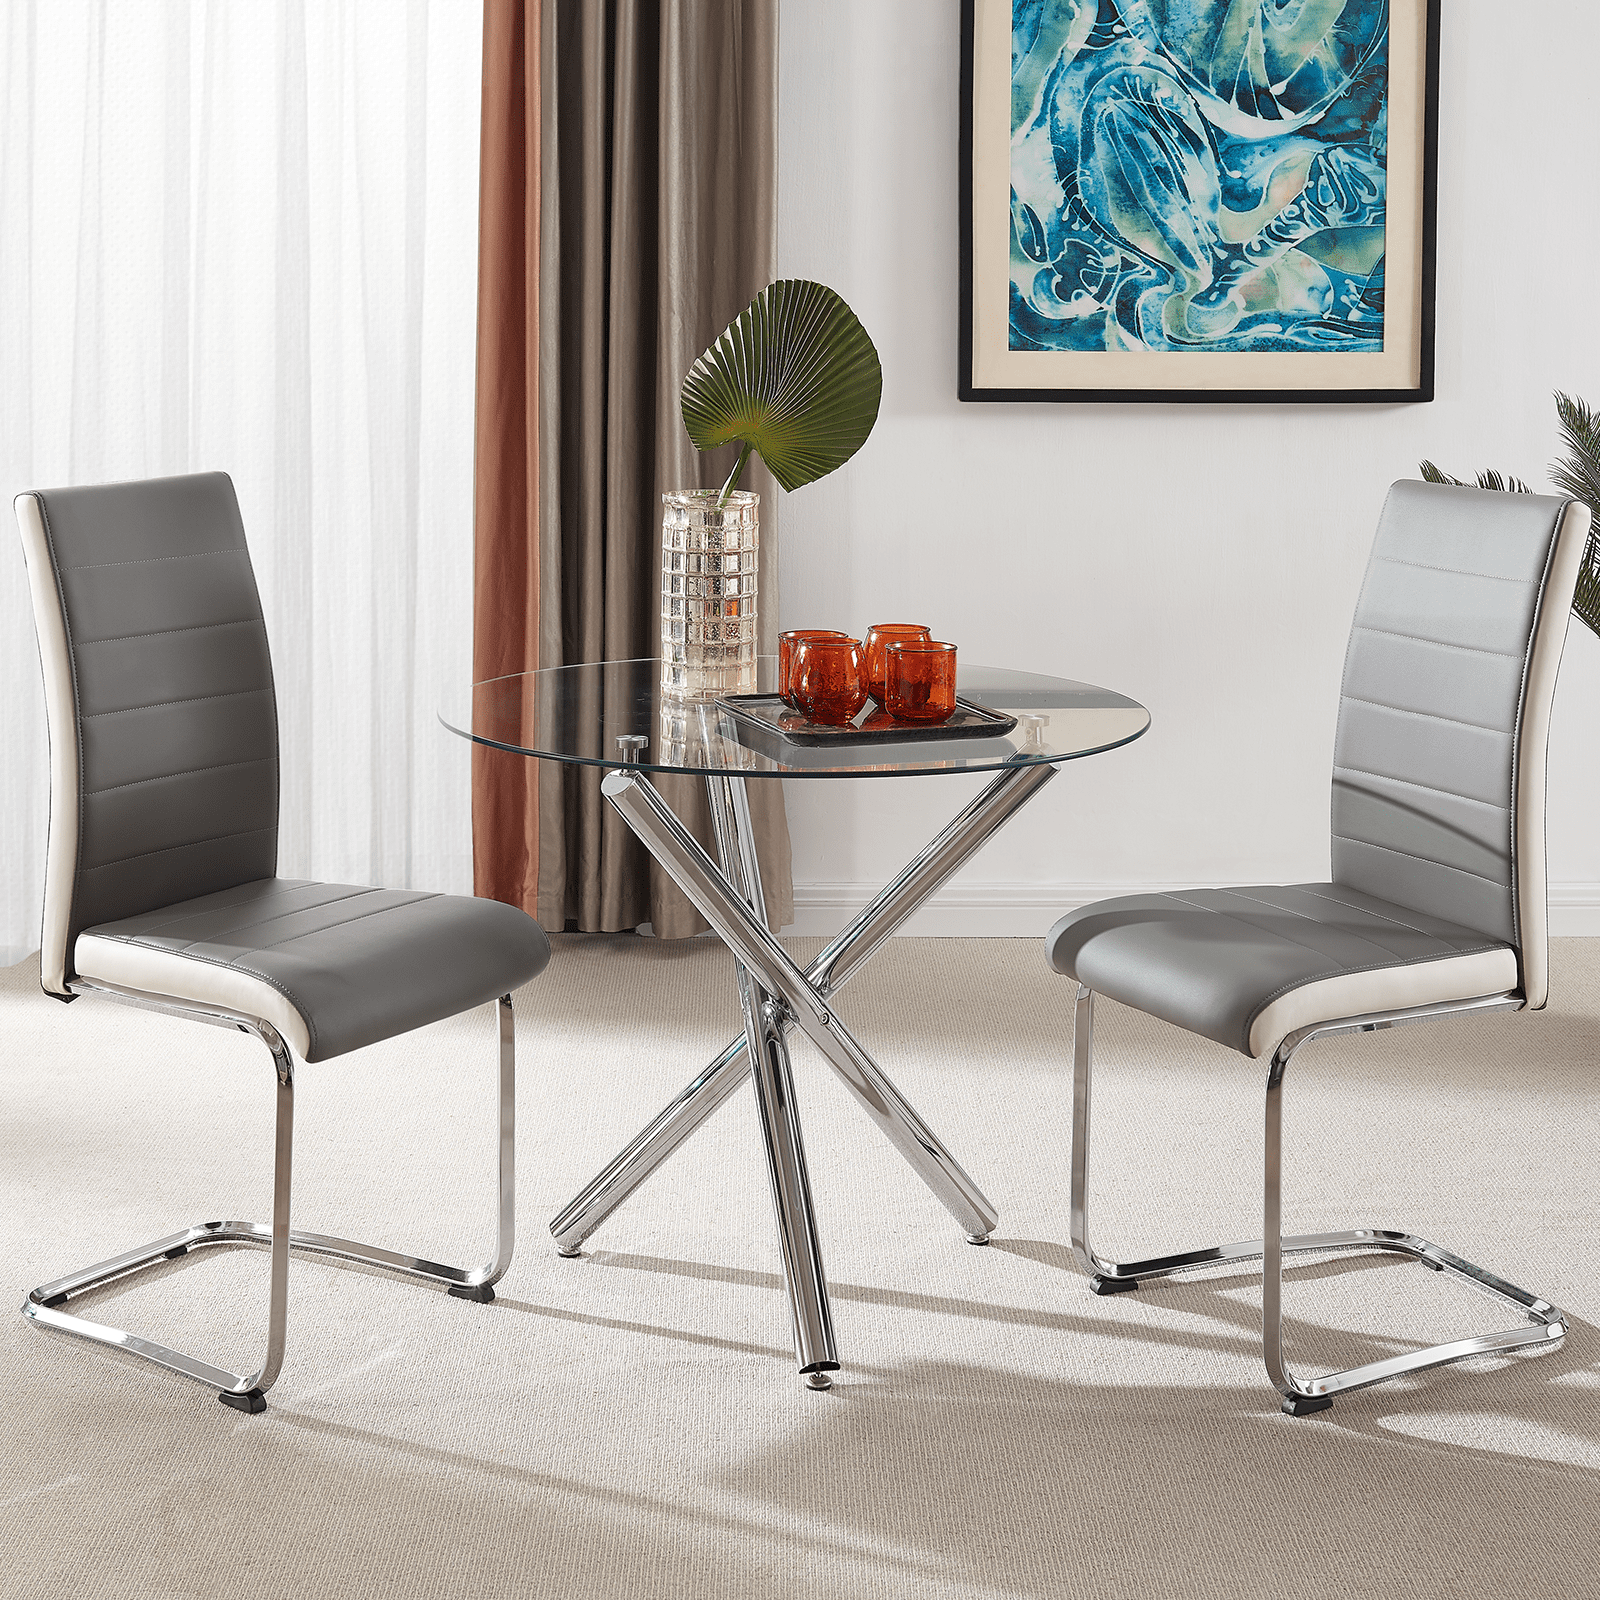 TONVISION Chrome Glass Dining Table and 2 Chairs Metal Cantilever Legs High Back Leather Covered Home Dining Room Furniture Set Black White Side Chair 